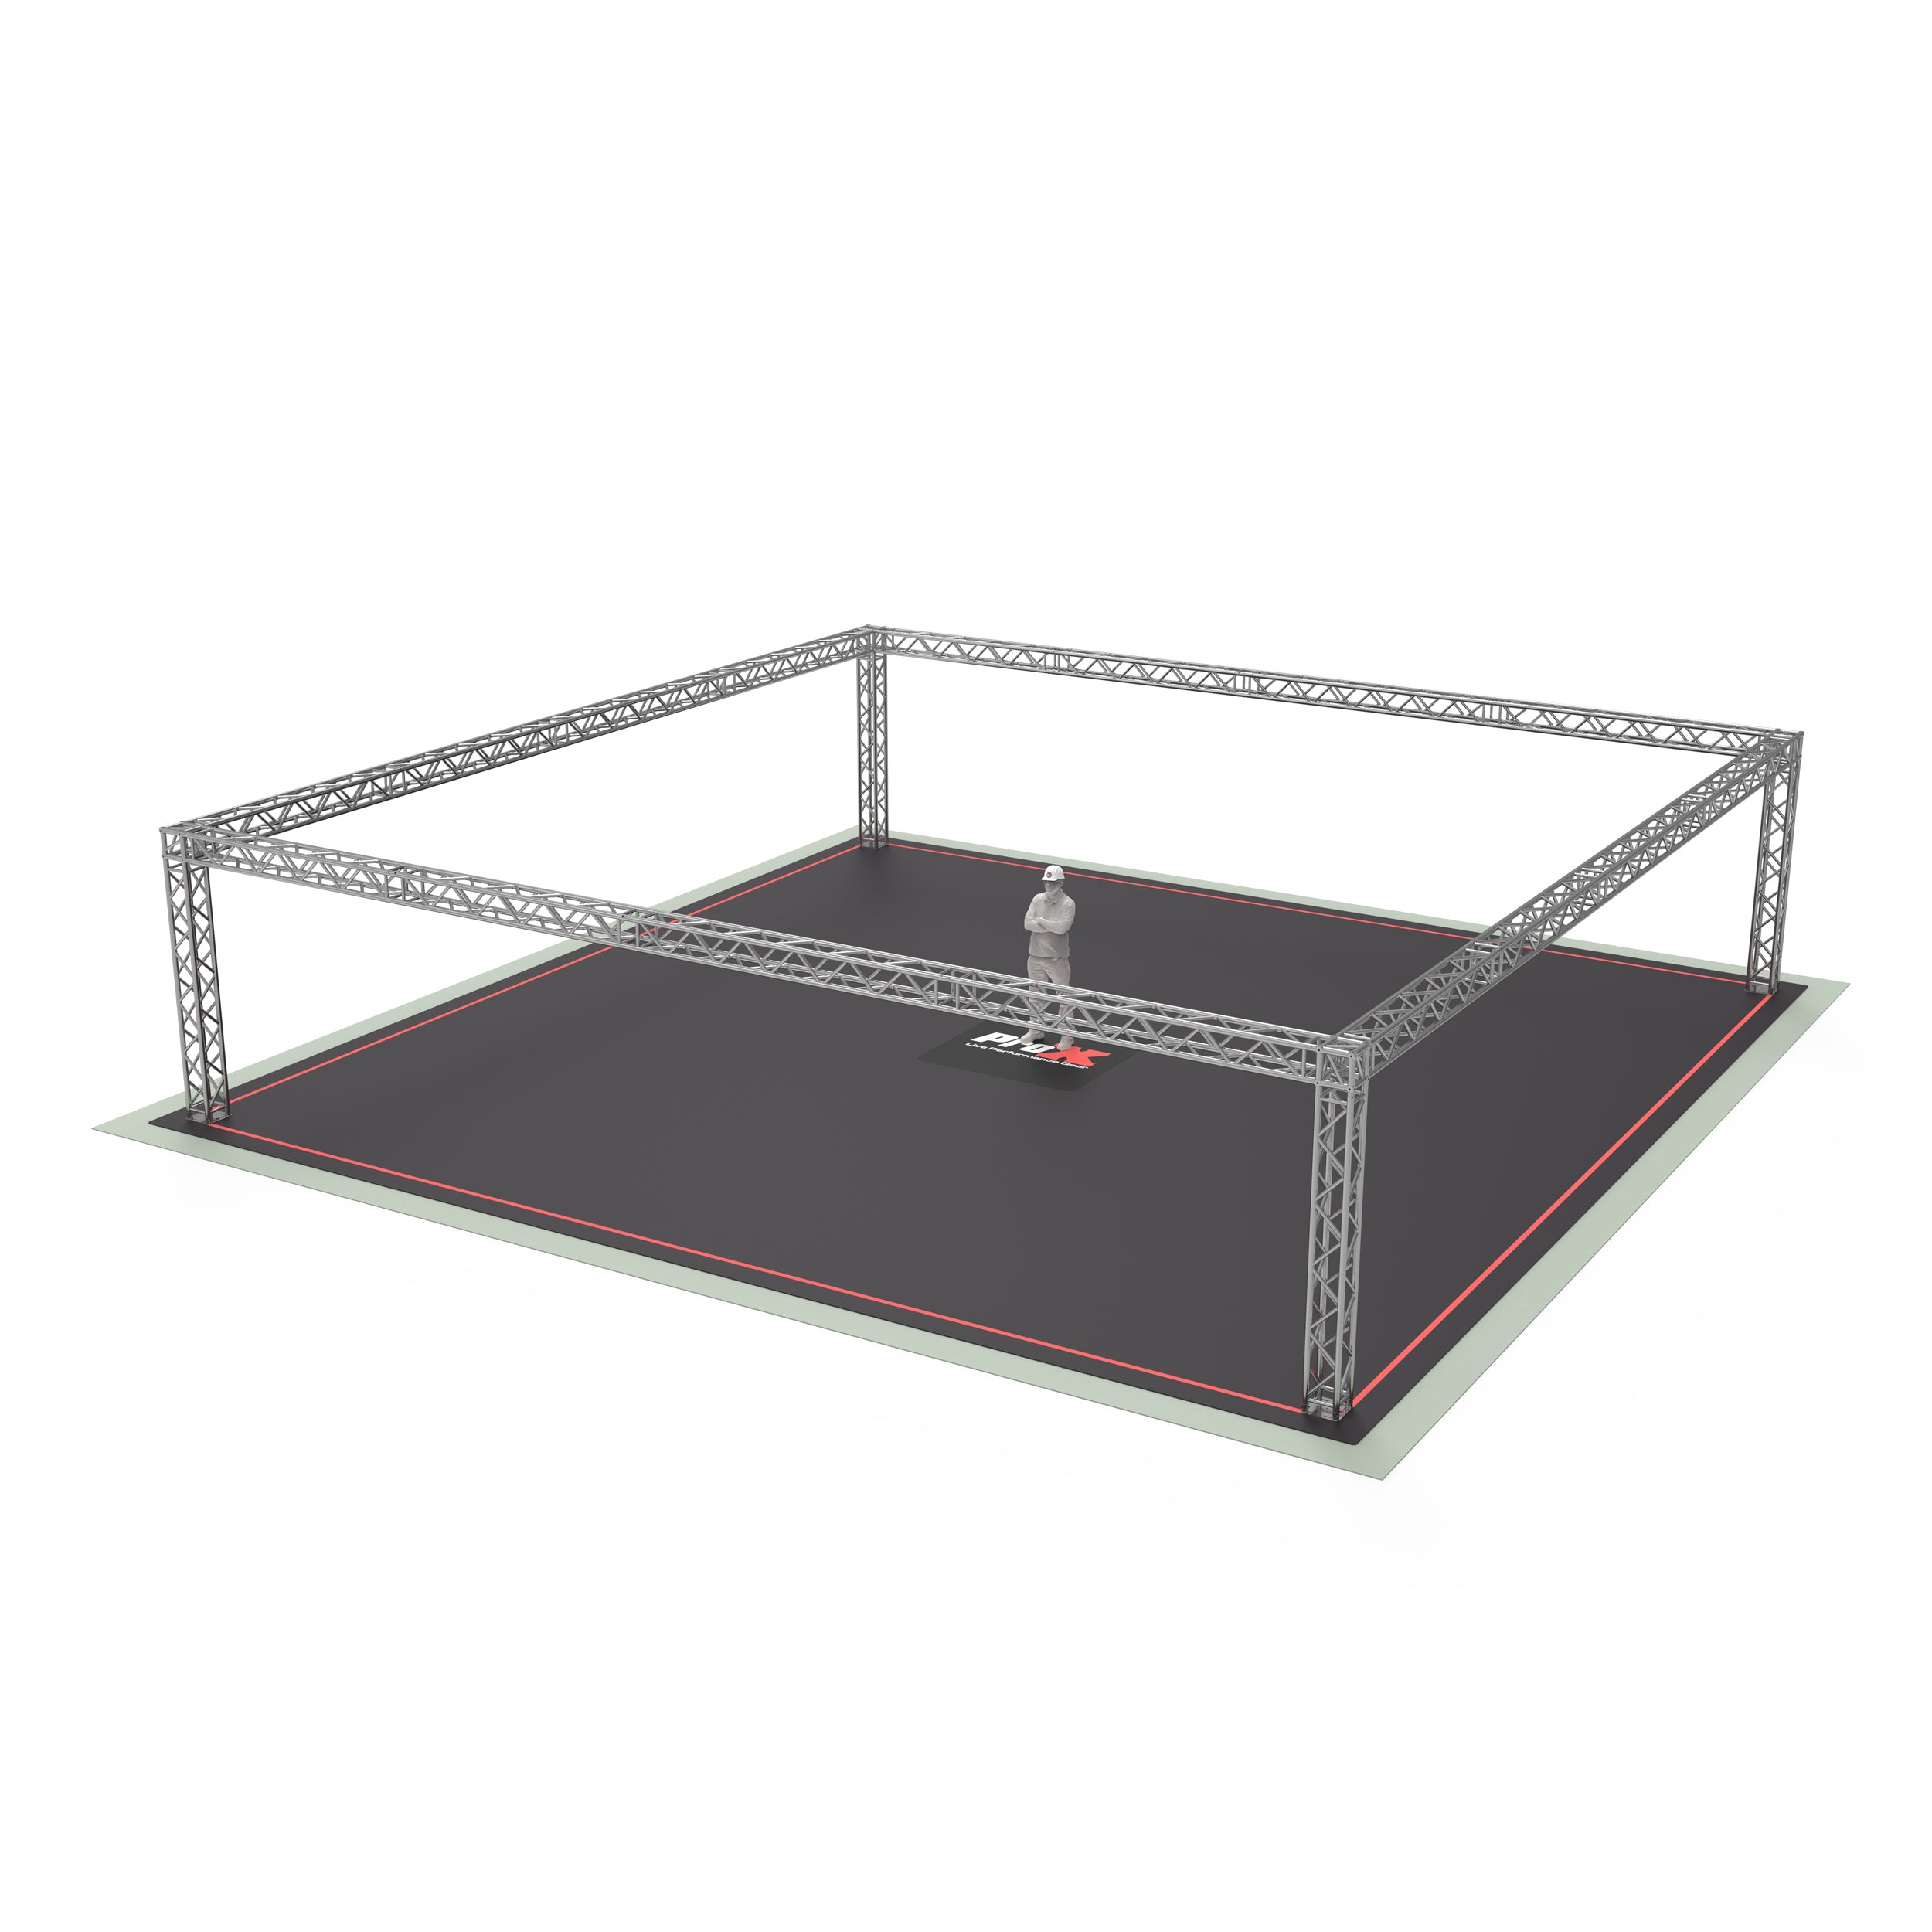 Pro X F34 Trade Show Display Booth Truss System – 40 x 20 x 9 Ft. XTP-40209